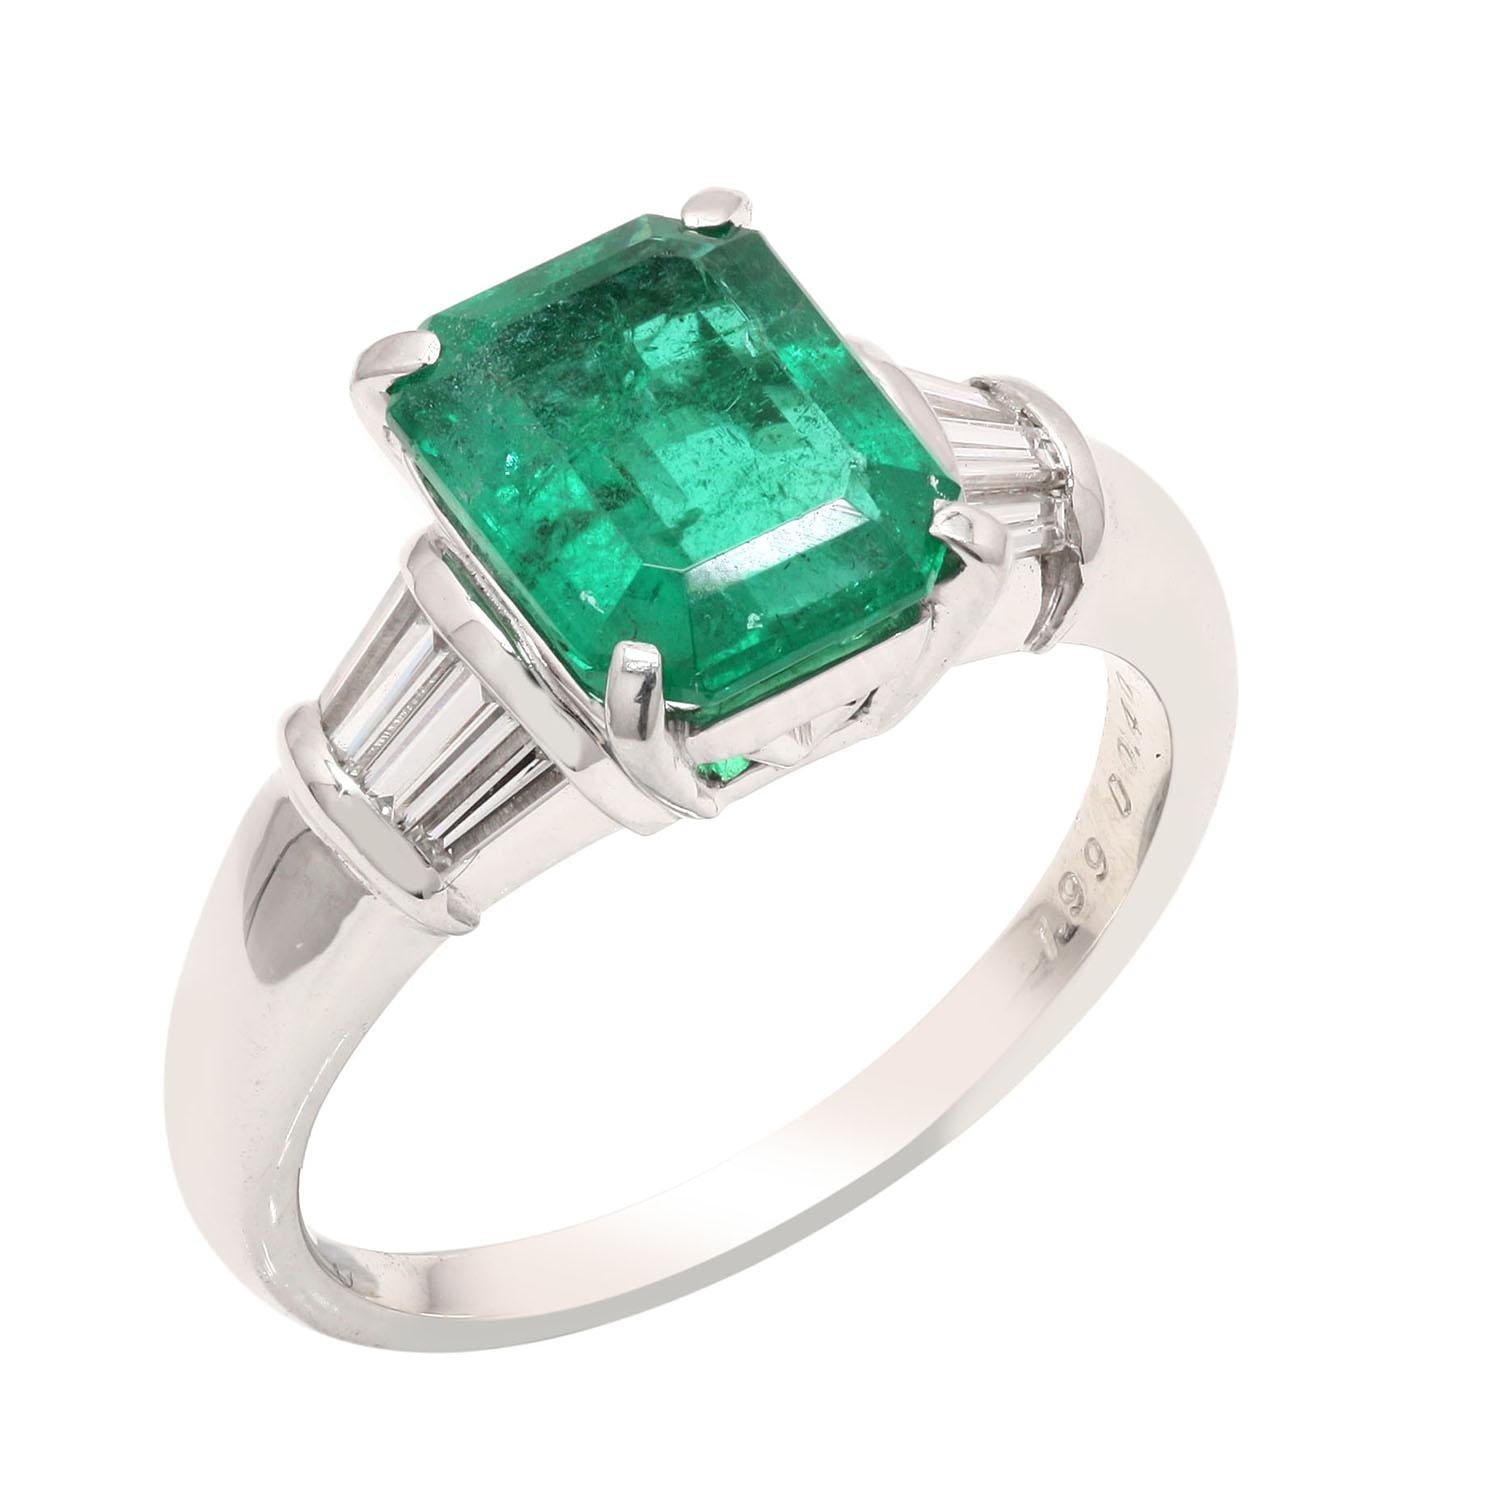 Emerald Cut Zambian Emerald Cocktail Ring with Baguette Diamonds Made in 18k White Gold For Sale